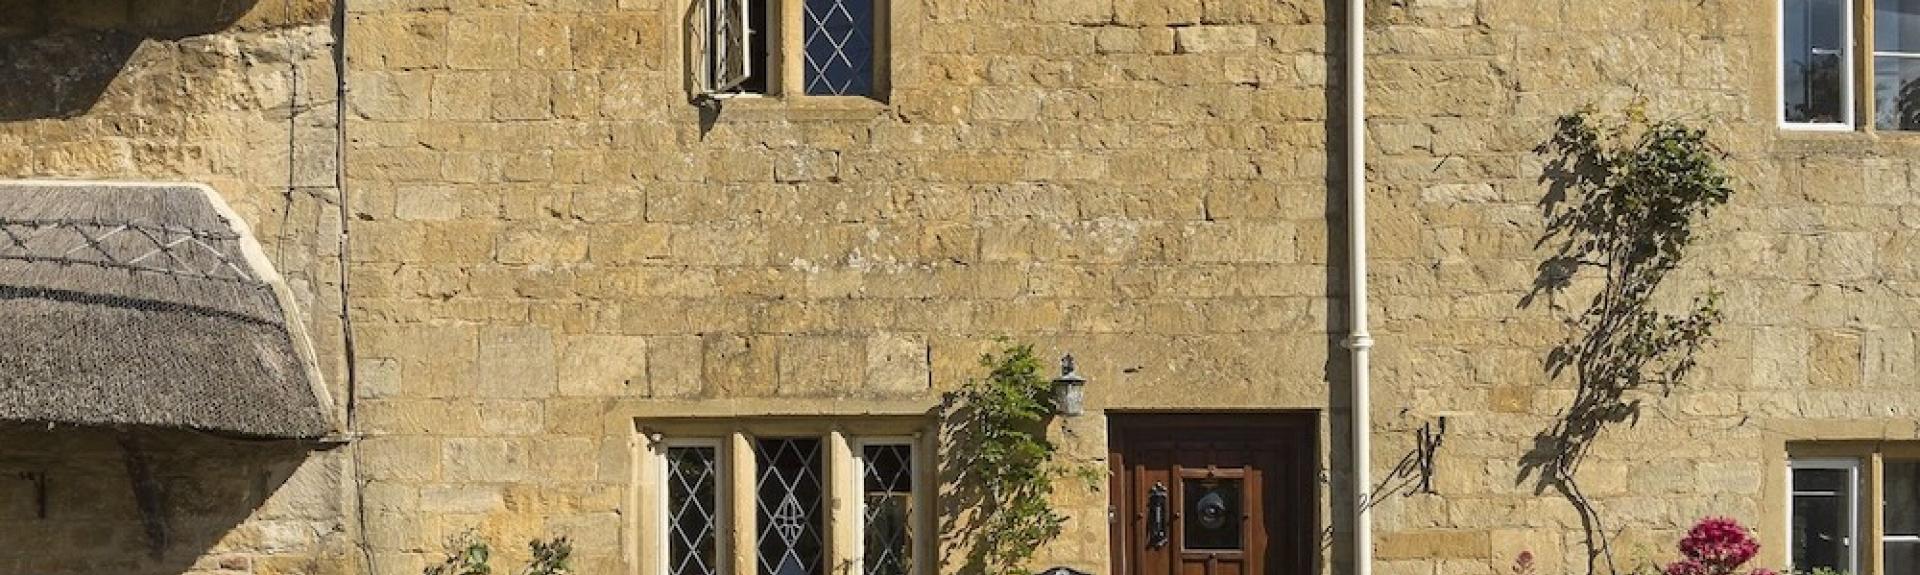 Exterior of a 2-storey, Cotswold 'honey stone' cottage with mullioned windows.